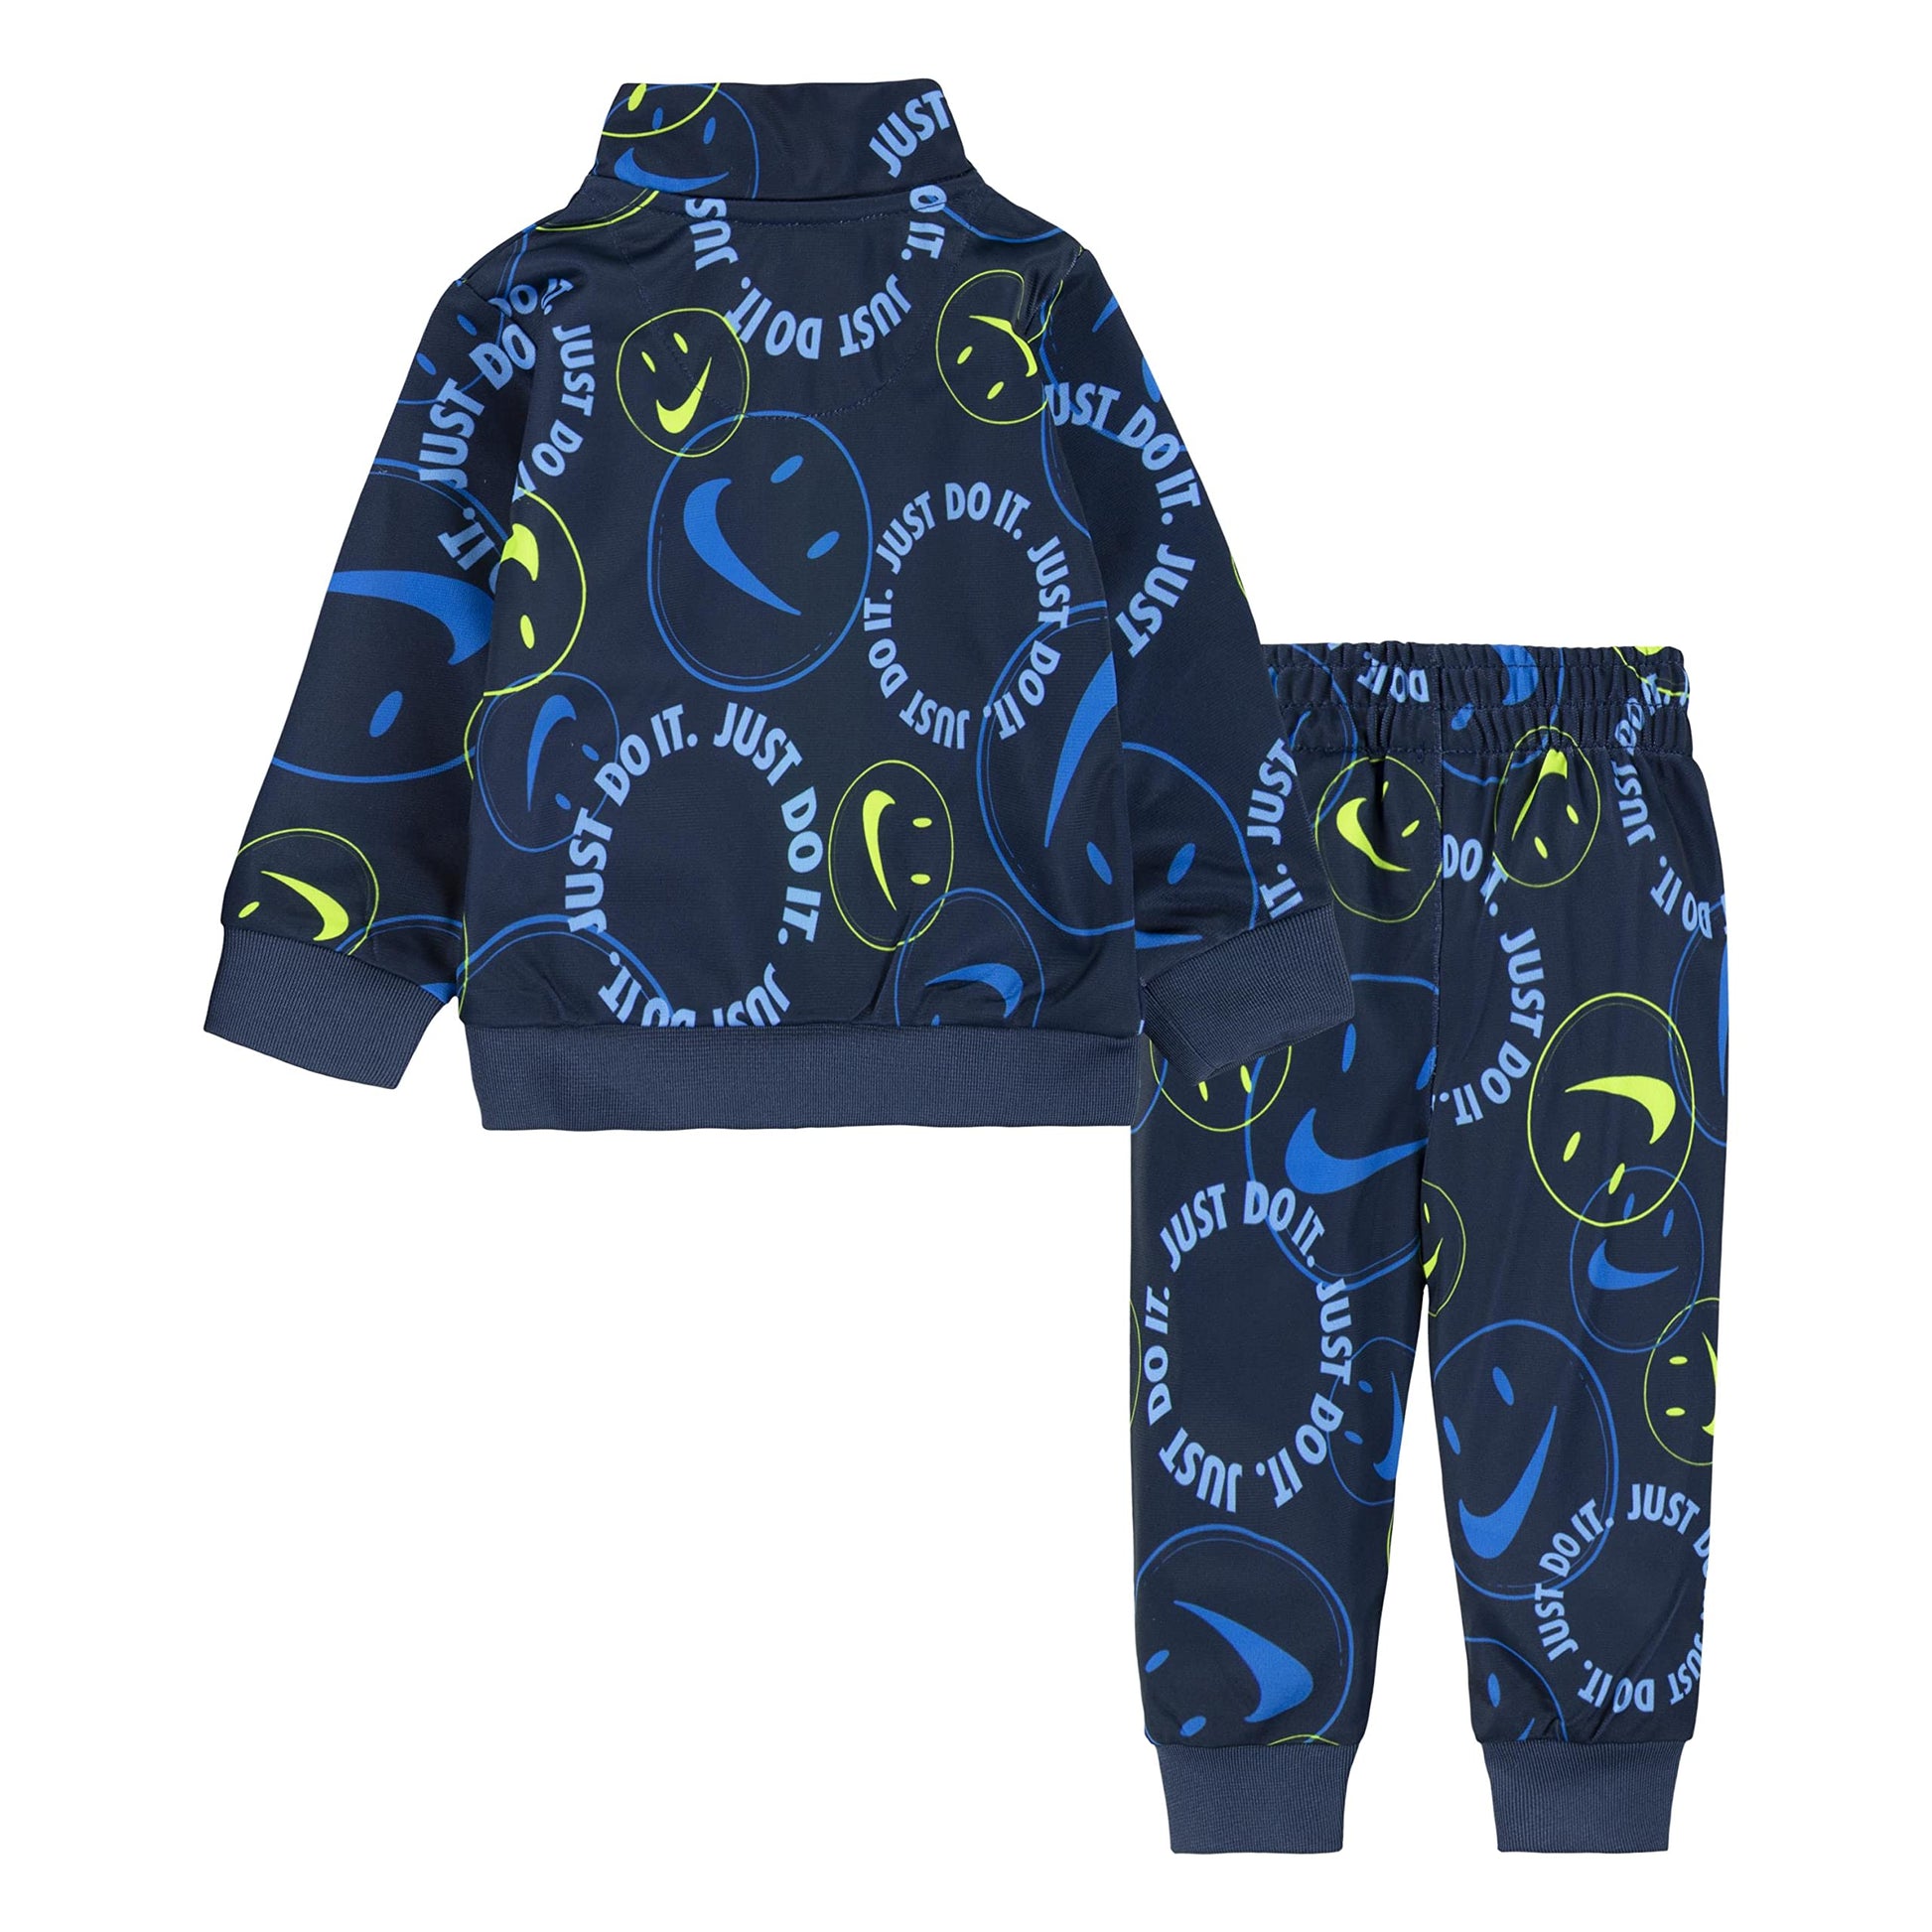 Image 2 of All Over Print Tricot Set (Infant)